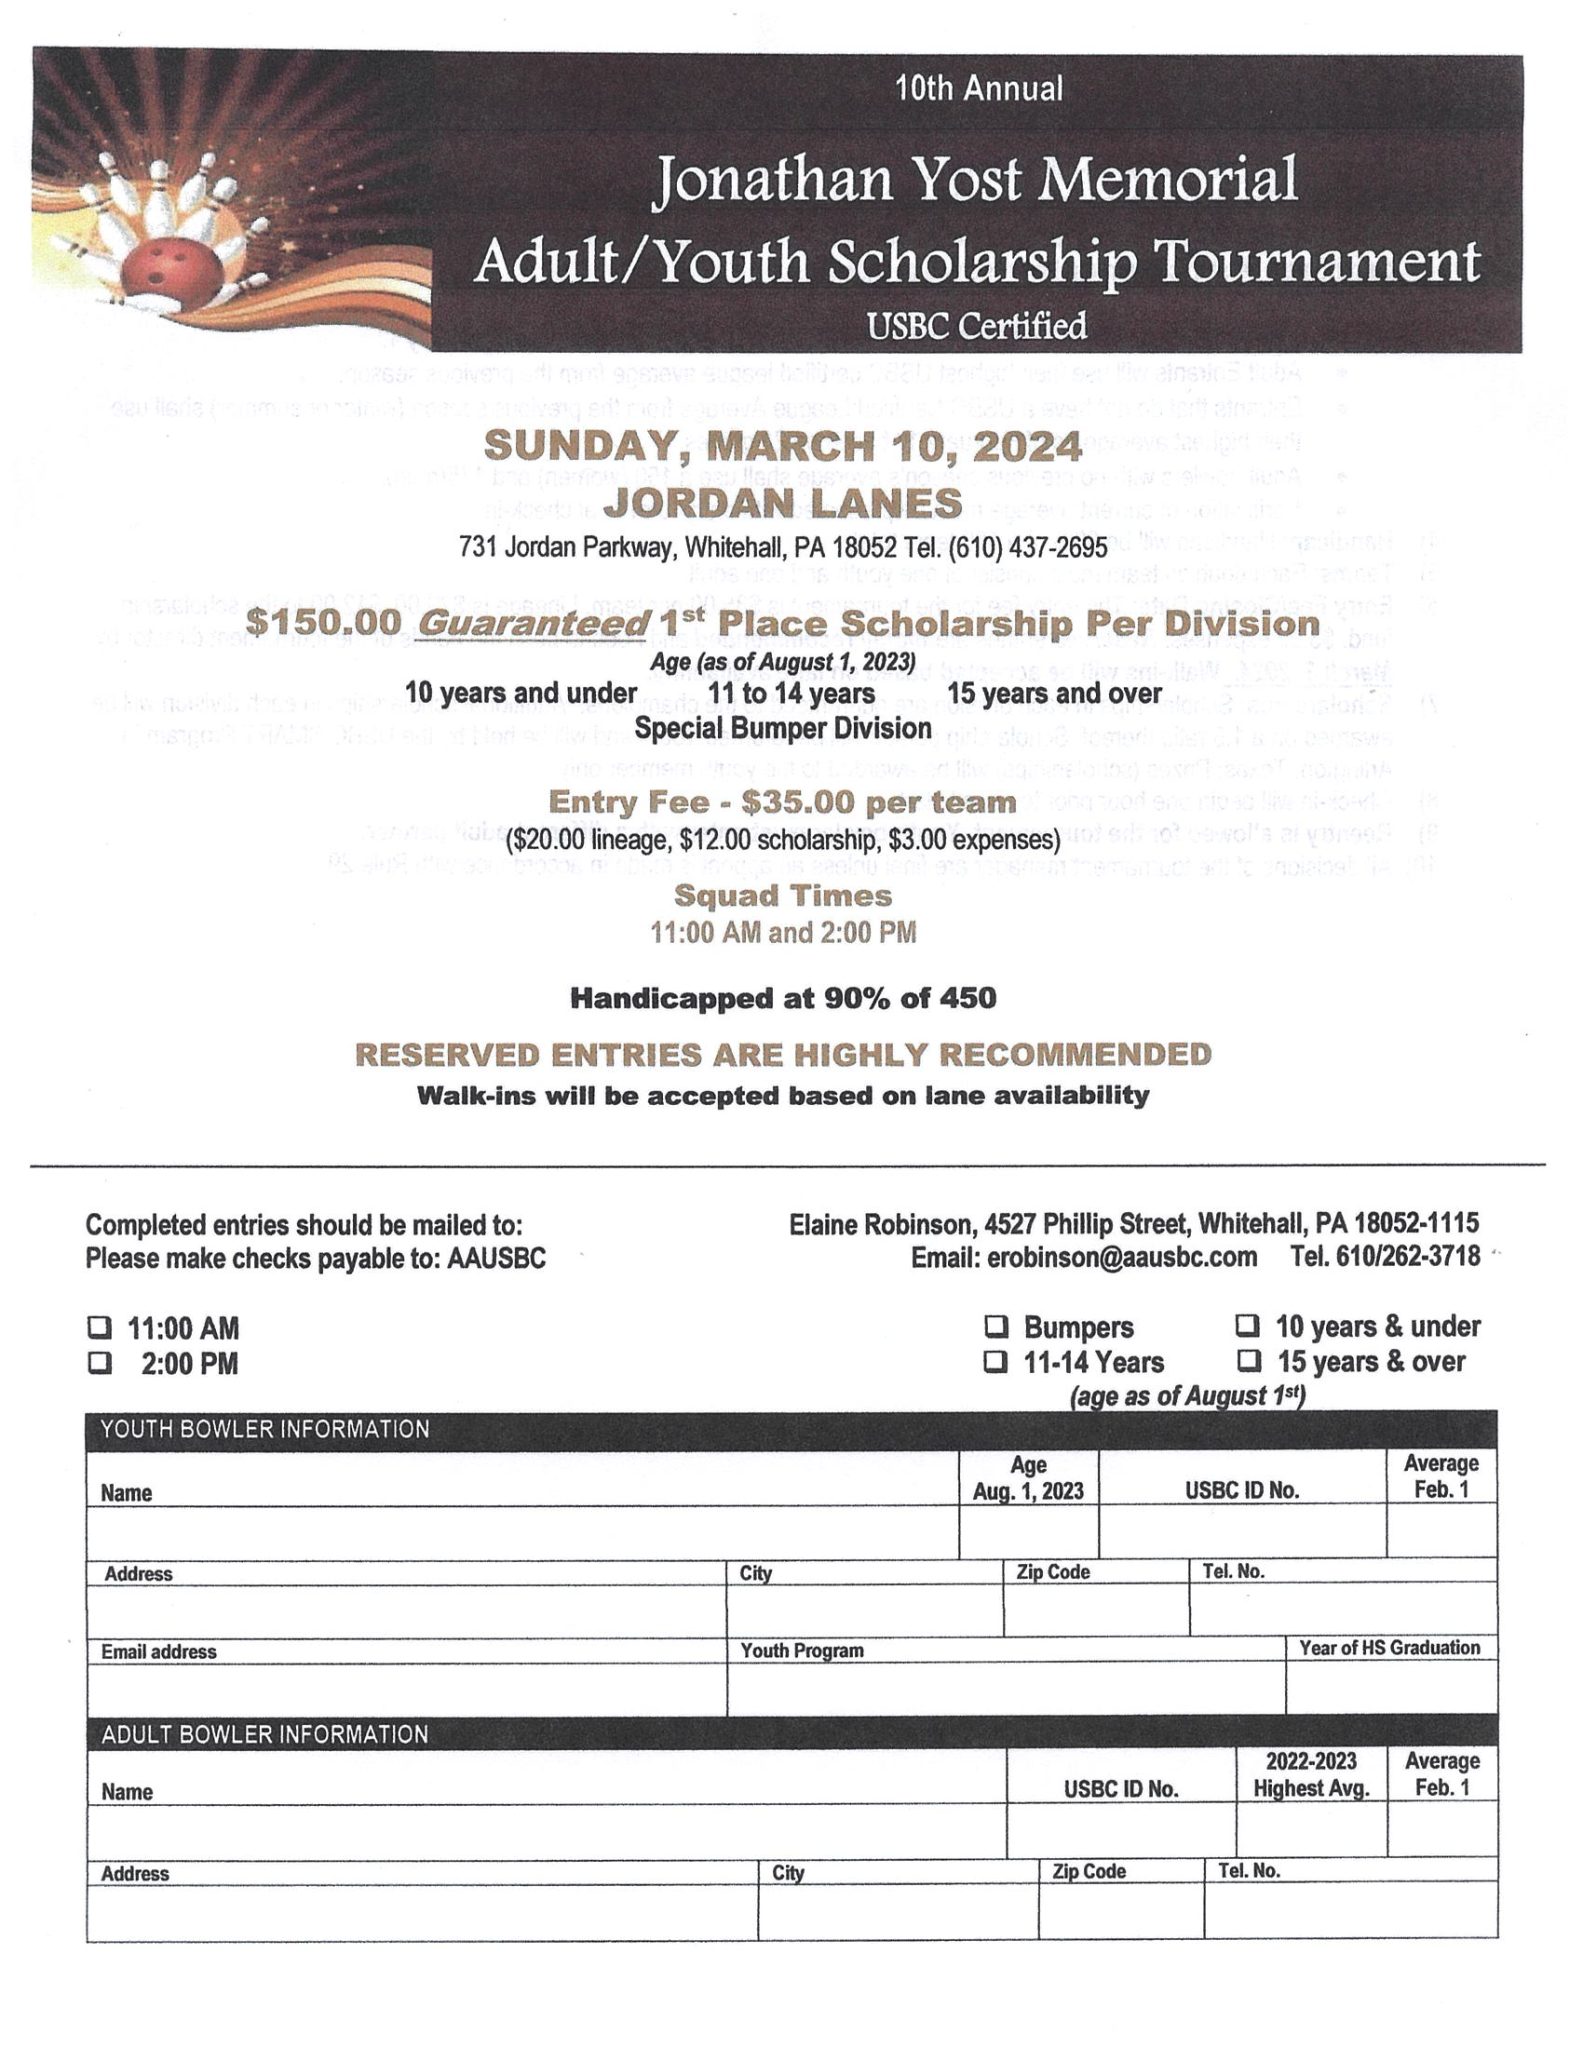 10th Annual Jonathan Yost Memorial Adult / Youth Scholarship Tournament 1